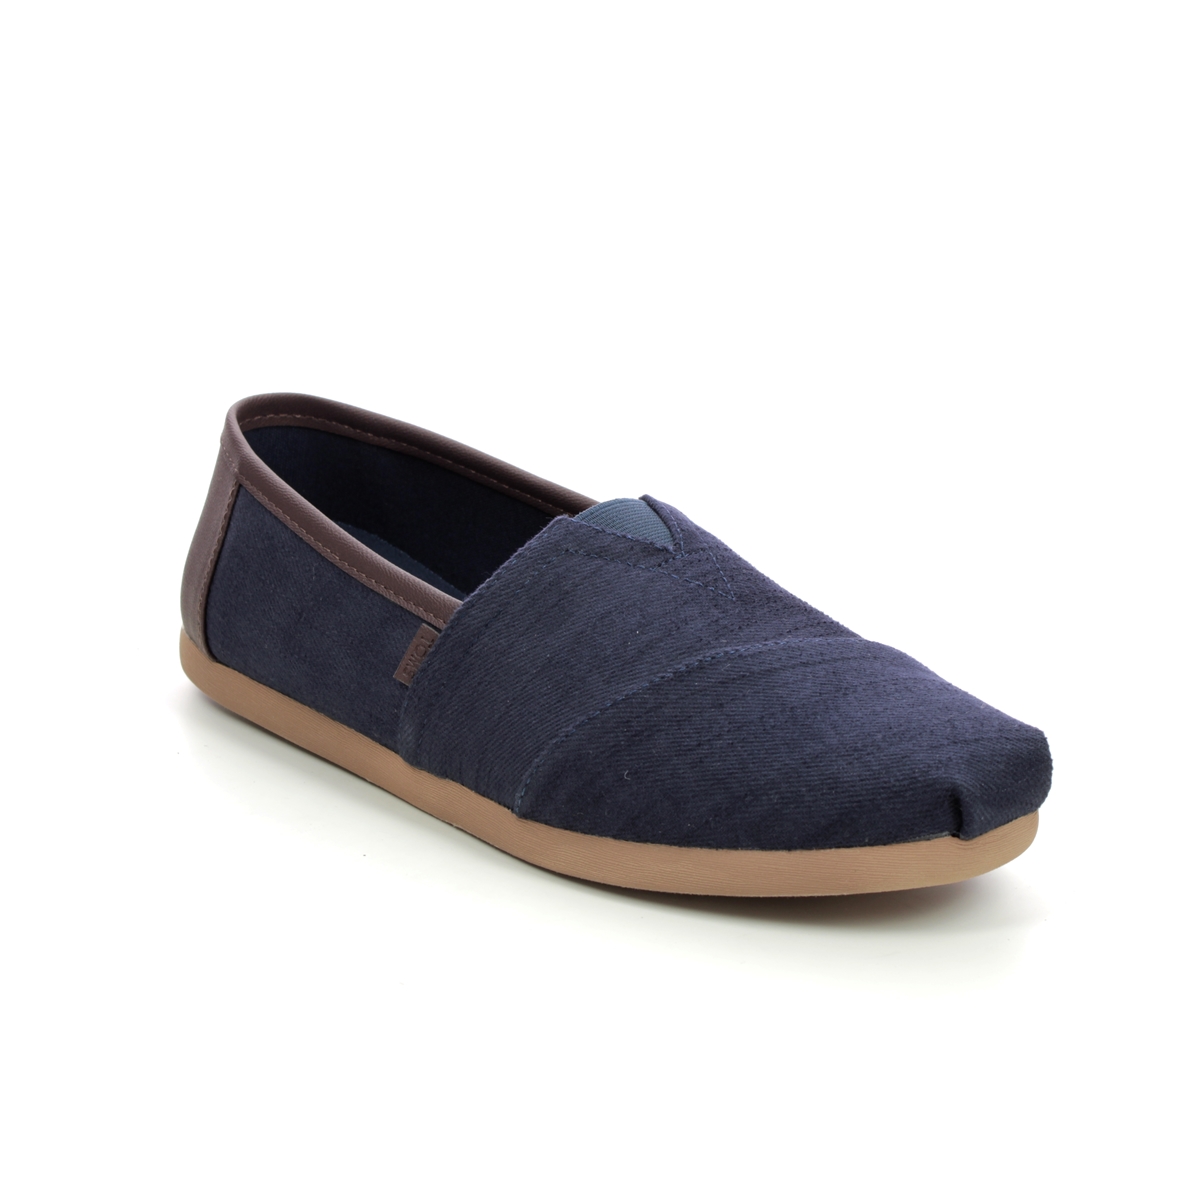 Toms Alpargata Classic Navy Brown Mens Slip-on Shoes 10017681- in a Plain Canvas in Size 8